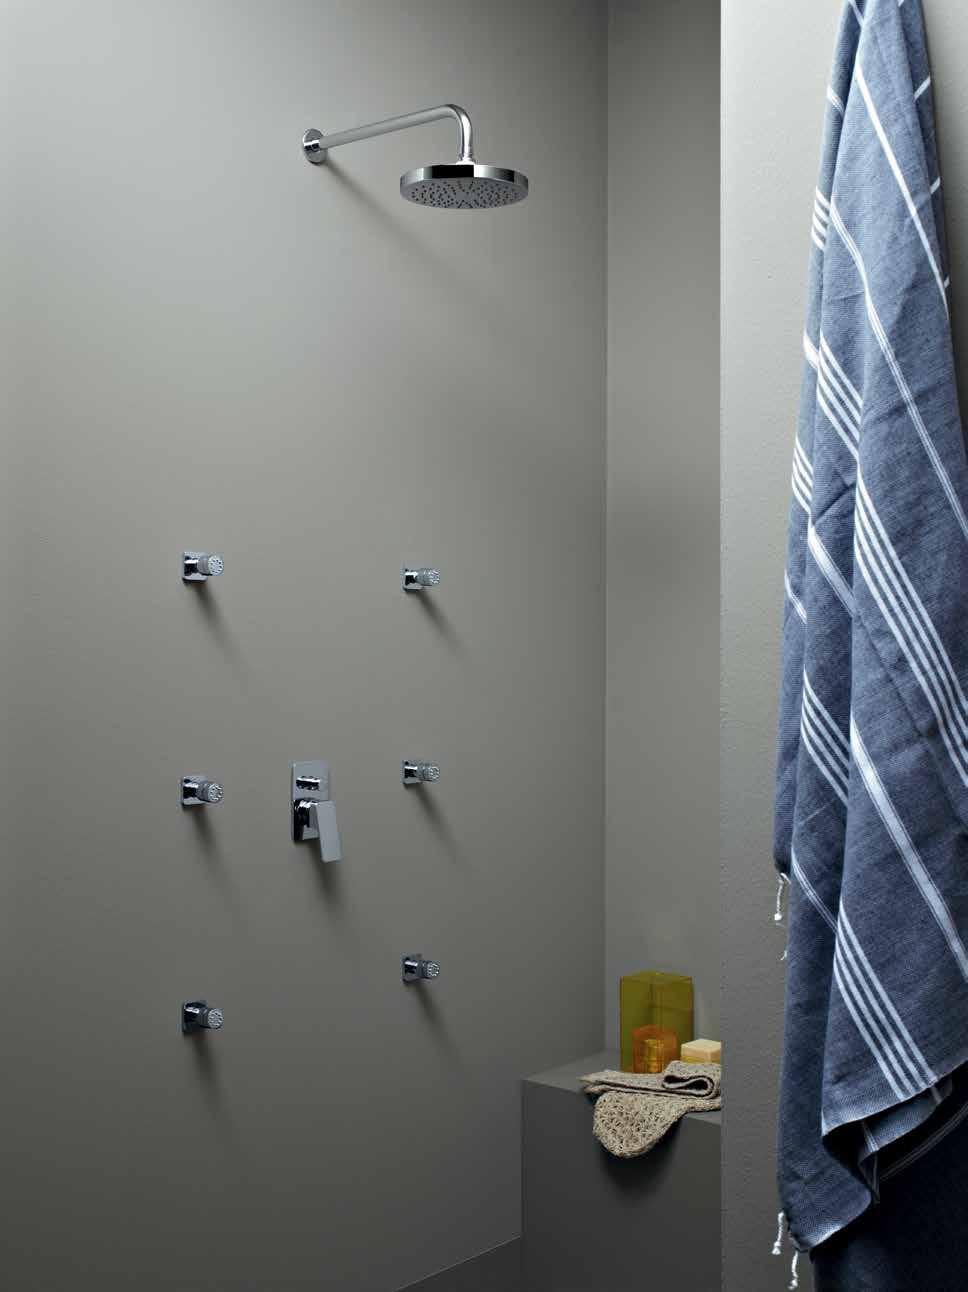 heads and shower head with wall